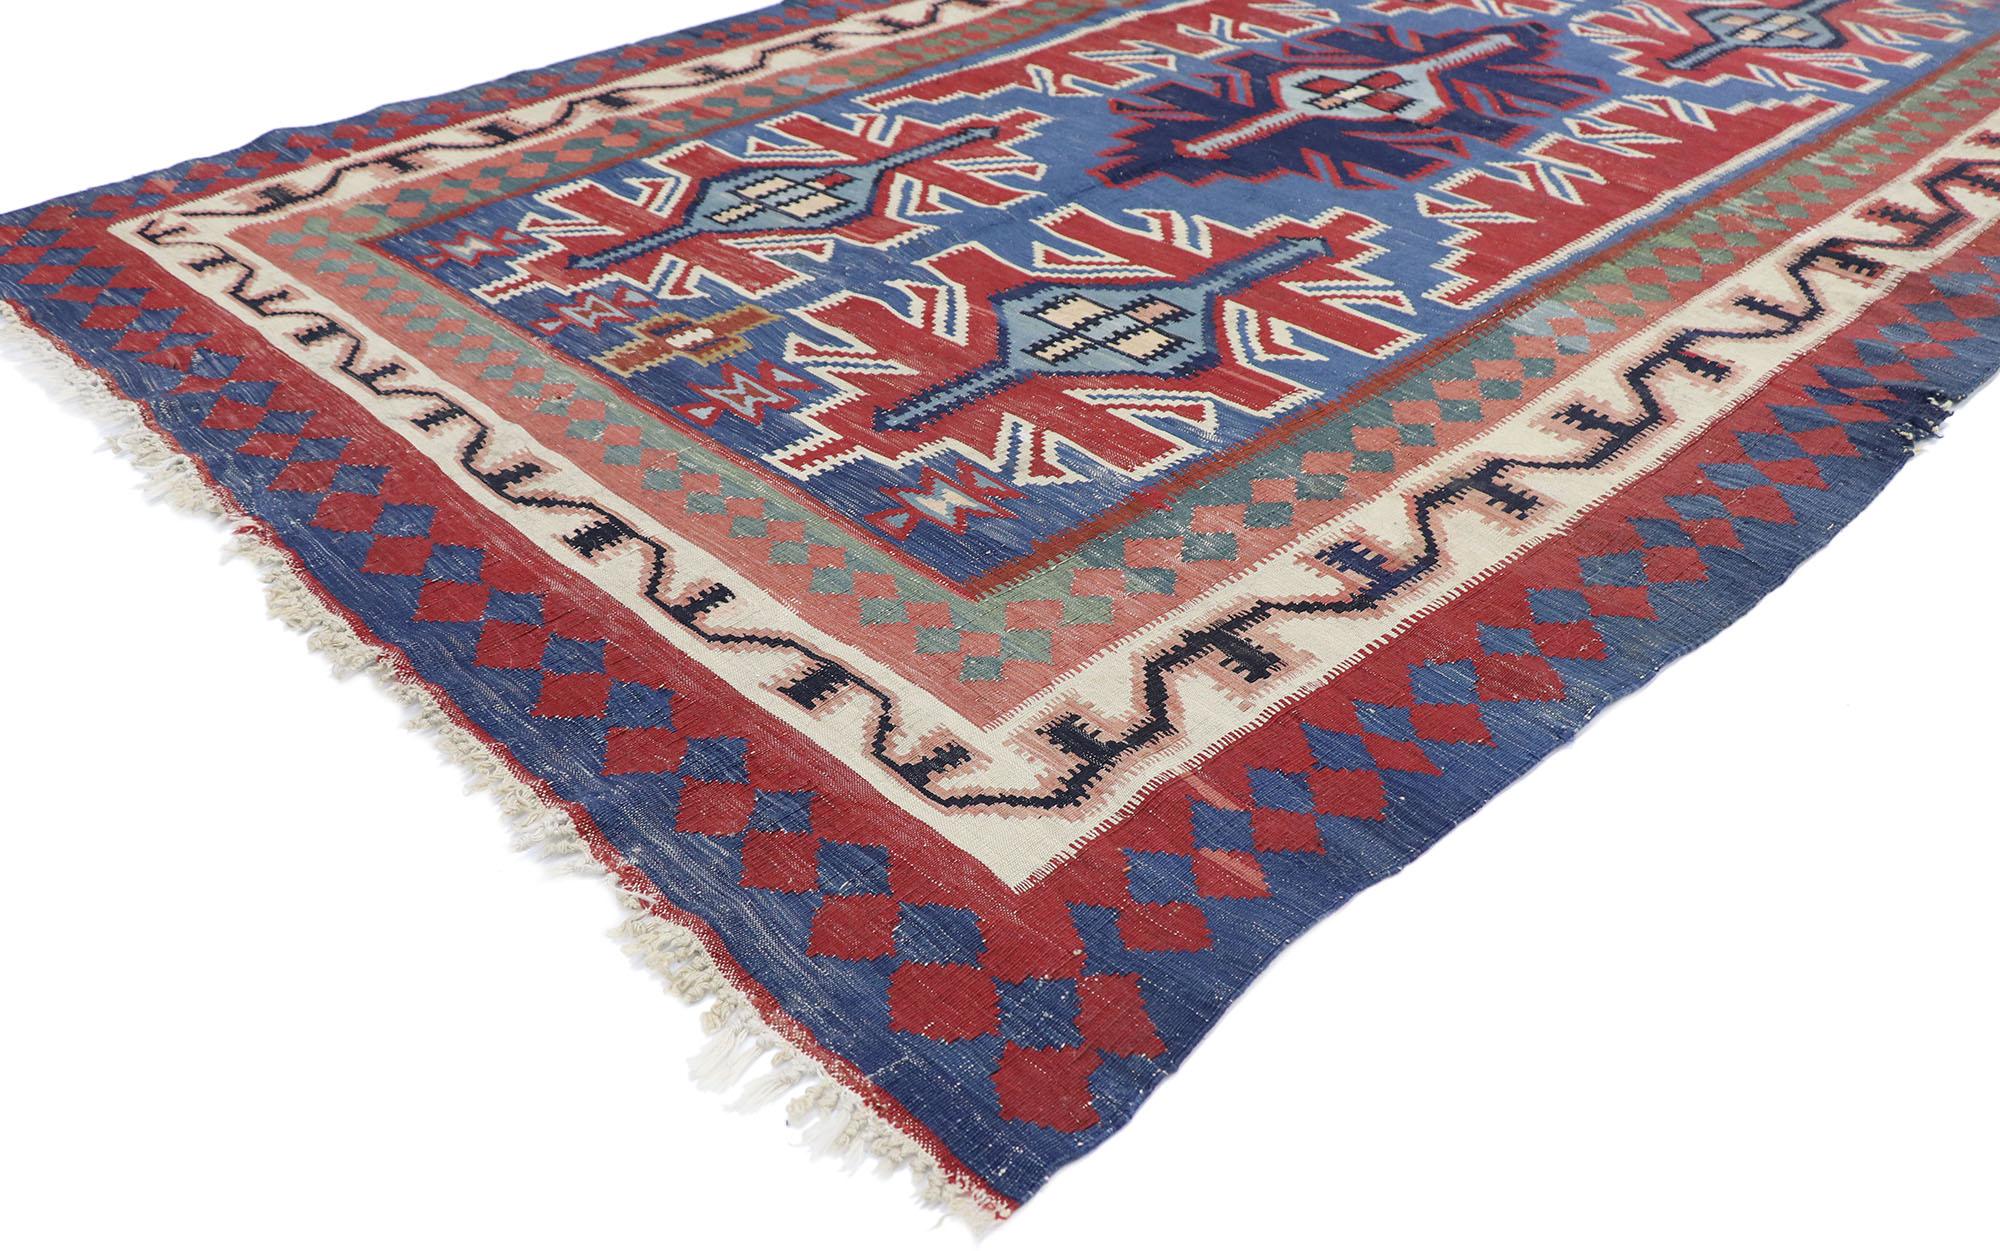 77646 Vintage Persian Shiraz Kilim rug with Modern Navajo style 05'07 x 08'07. With its bold expressive design, incredible detail and texture, this hand-woven wool vintage Persian Shiraz Kilim rug is a captivating vision of woven beauty highlighting